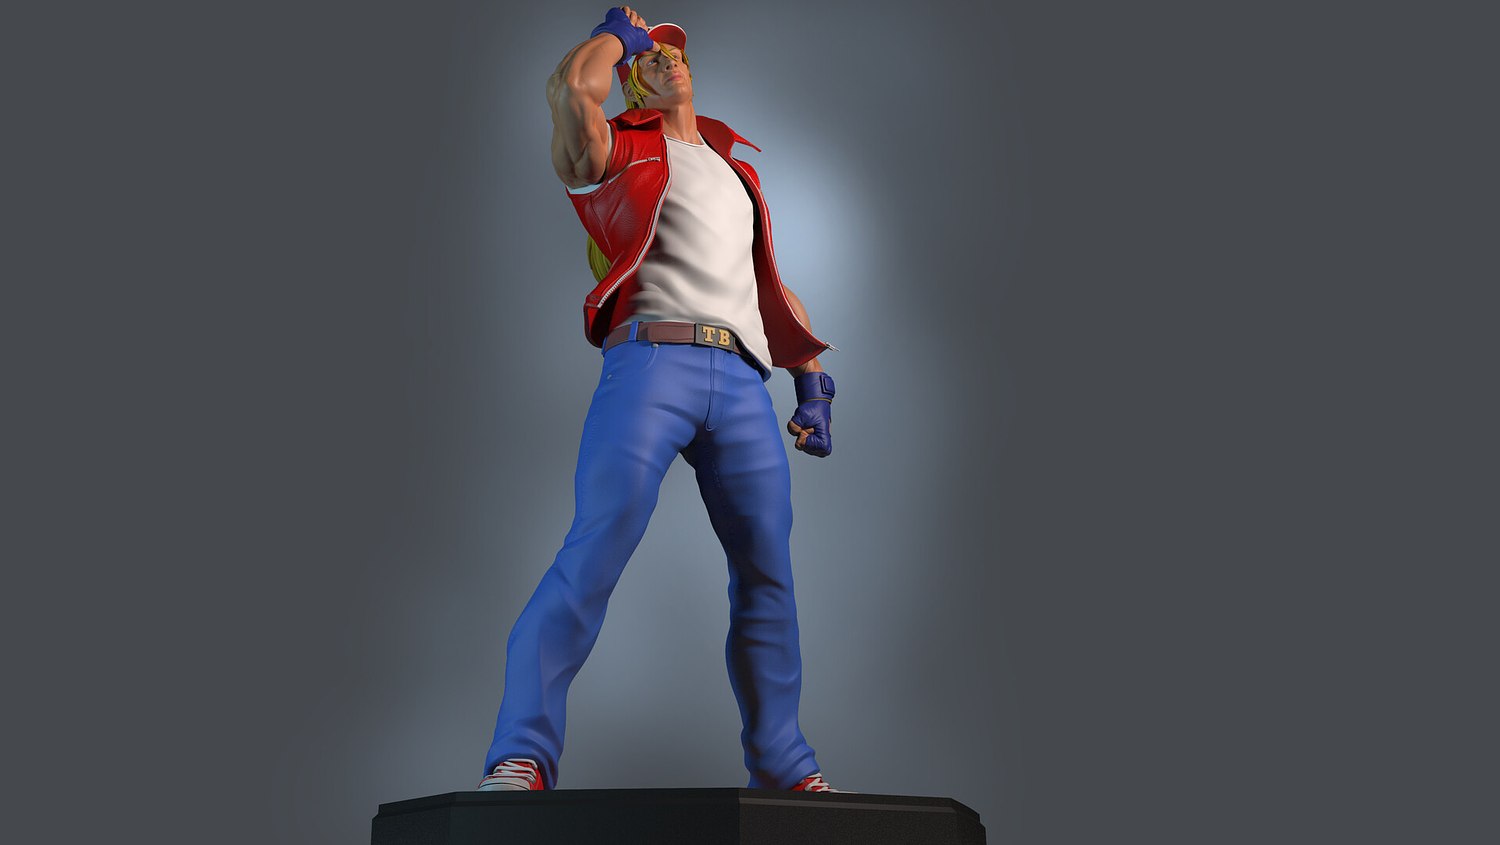 Terry Bogard V2 From Fatal Fury